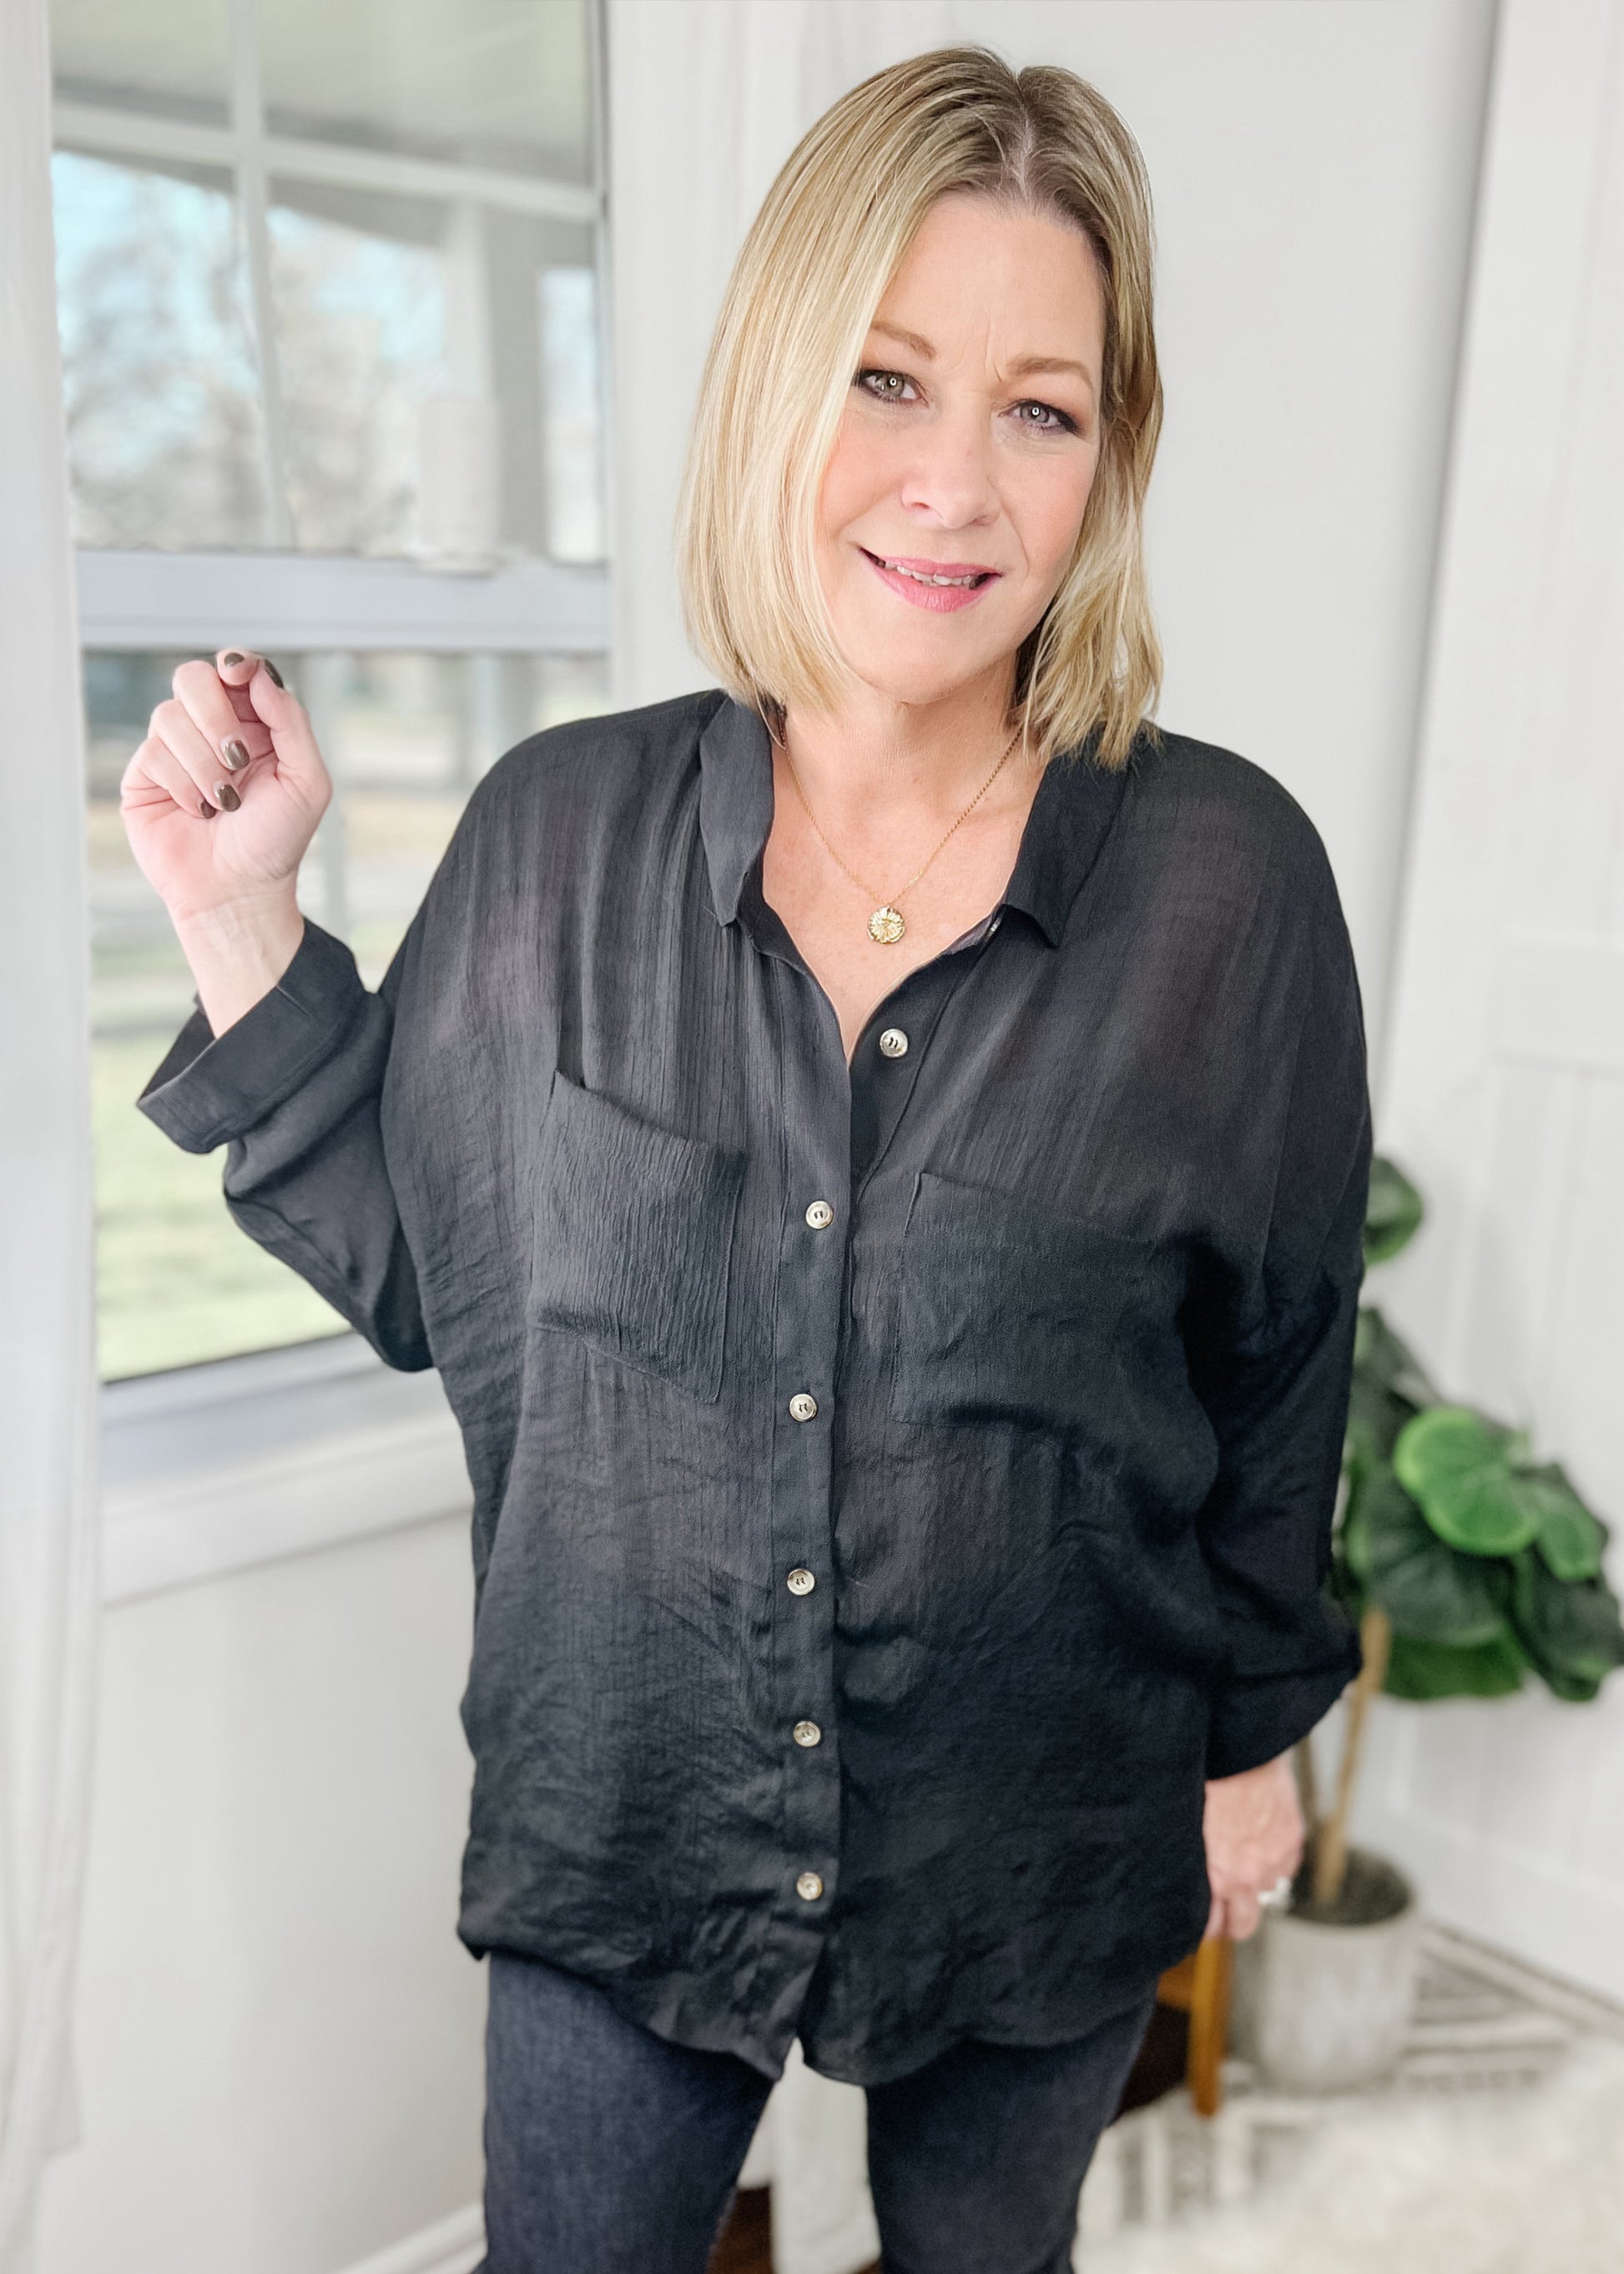 Black semi sheer button down with front breast pockets, collar, and sleeve strap to roll sleeves.  